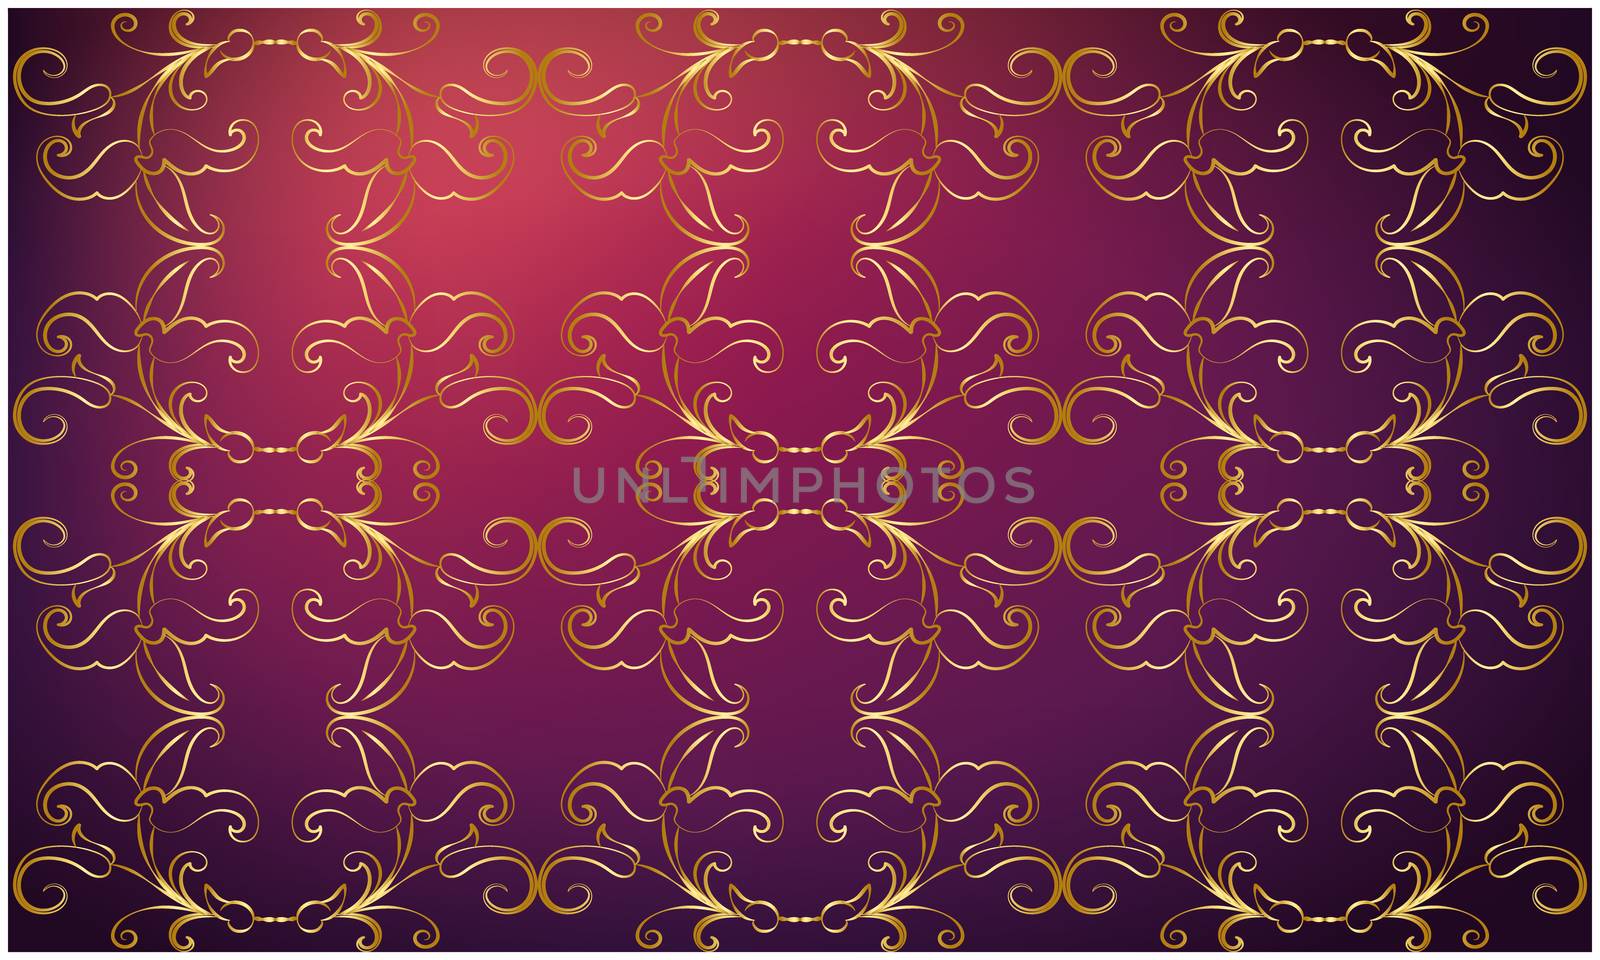 digital textile gold design on abstract background by aanavcreationsplus